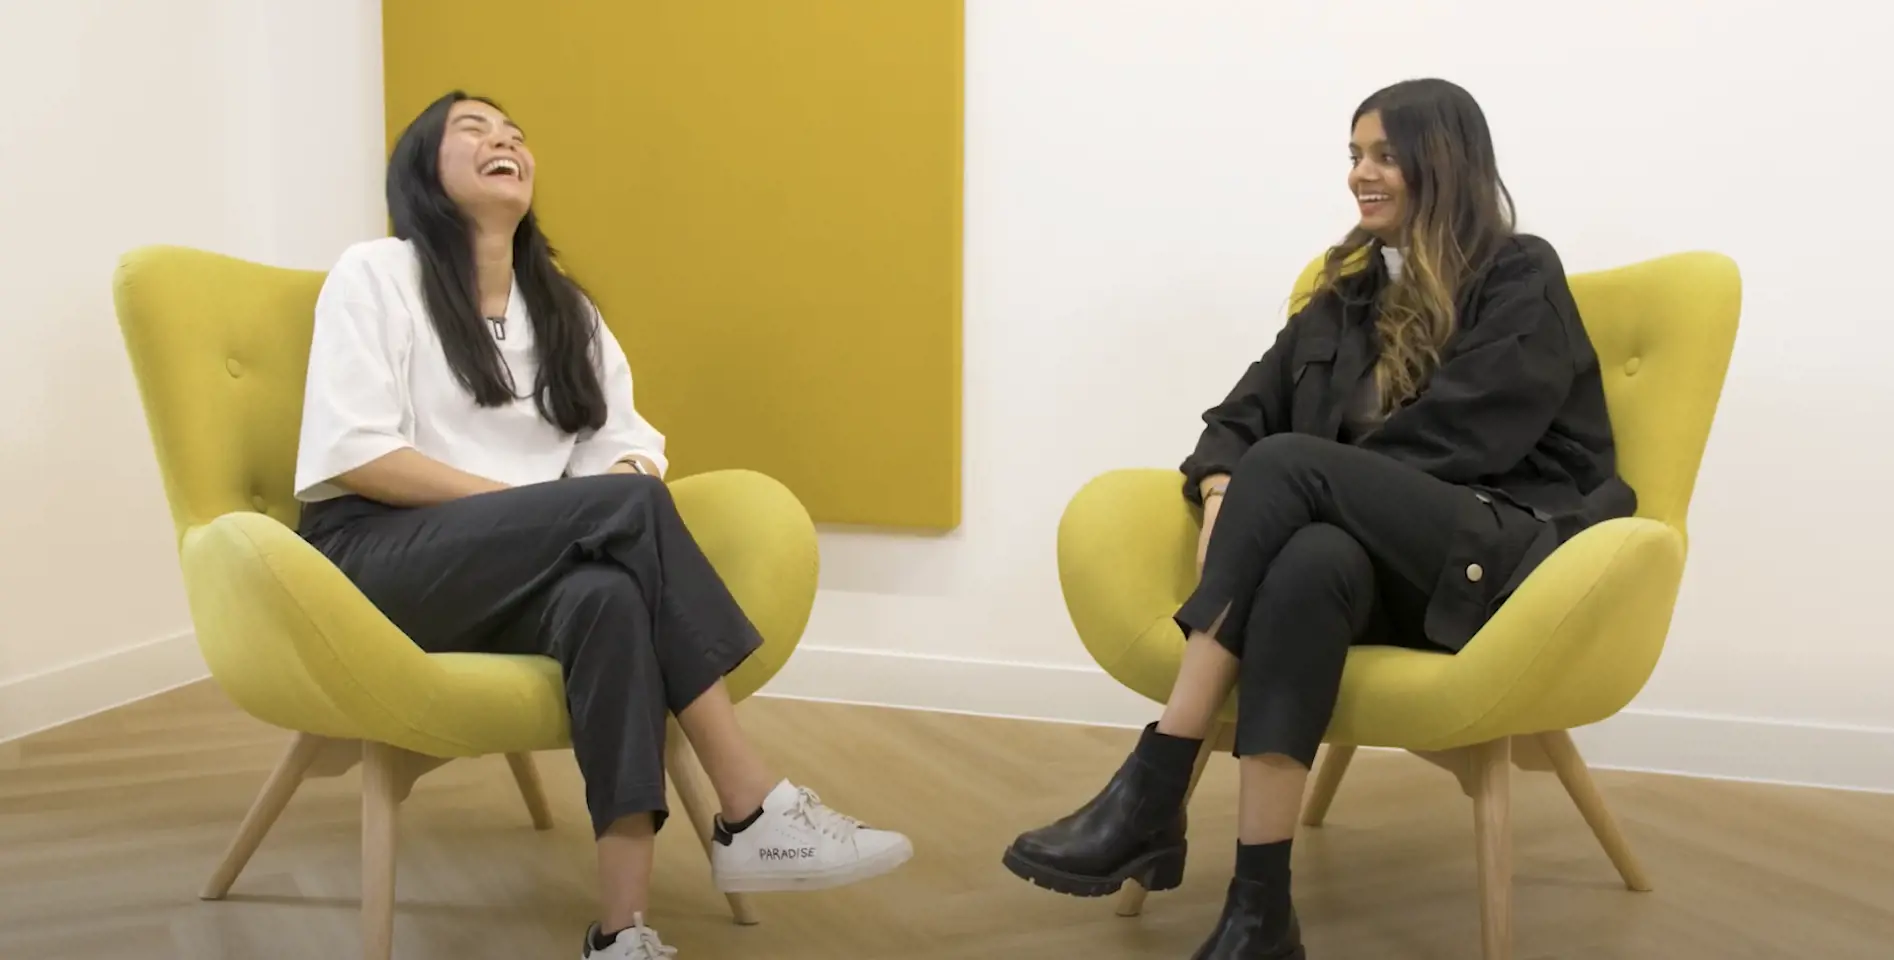 Two women laughing in an office